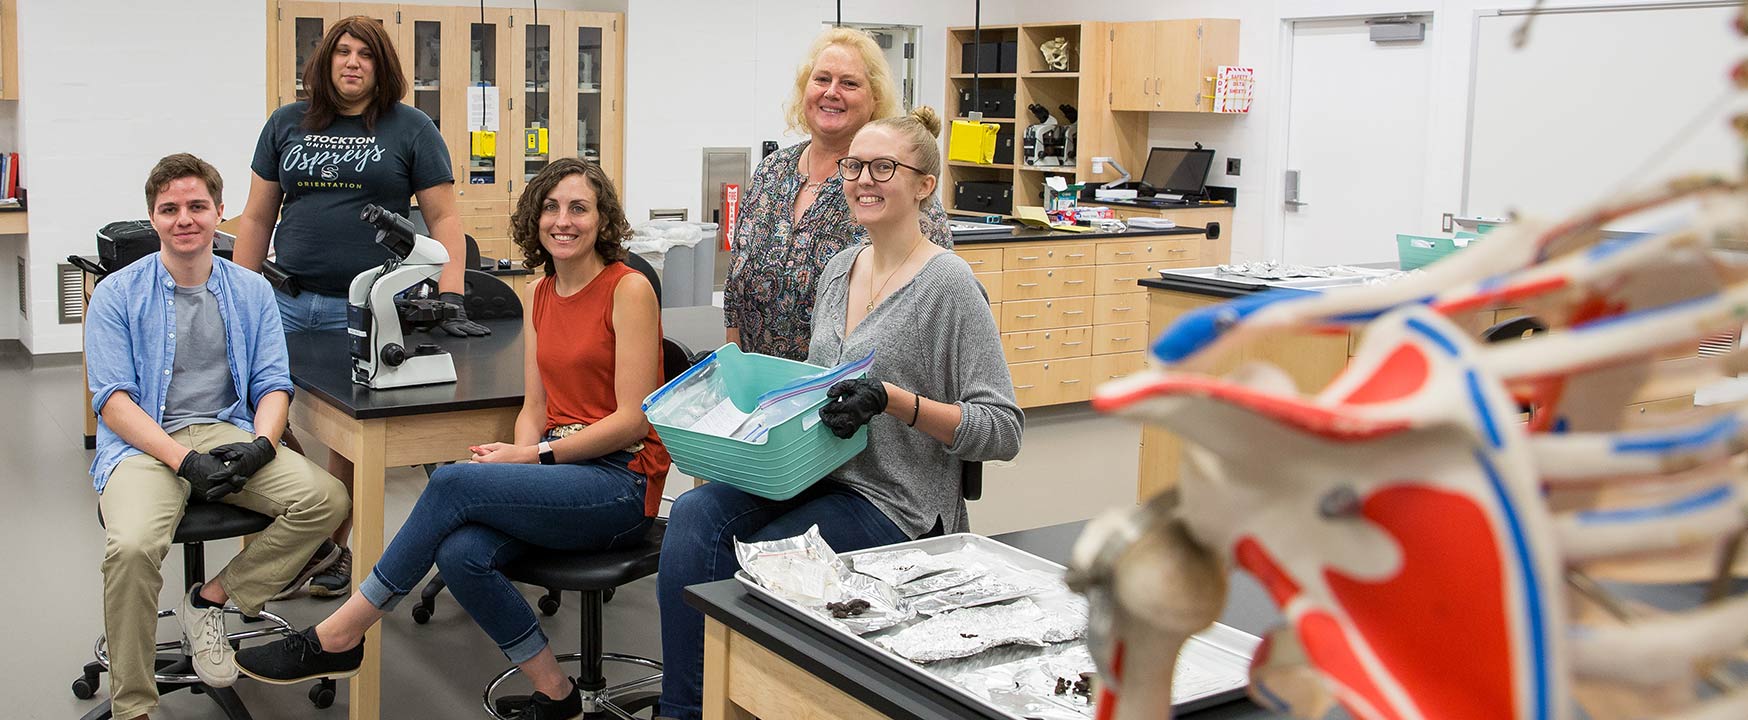 From left, Joseph Ross, Jennifer Rios, Professor Hornbeck, Anne LoDico and Carly Hammartstrom take a break from sifting through samples Hornbeck collected in the western Aleutian Islands of Alaska.